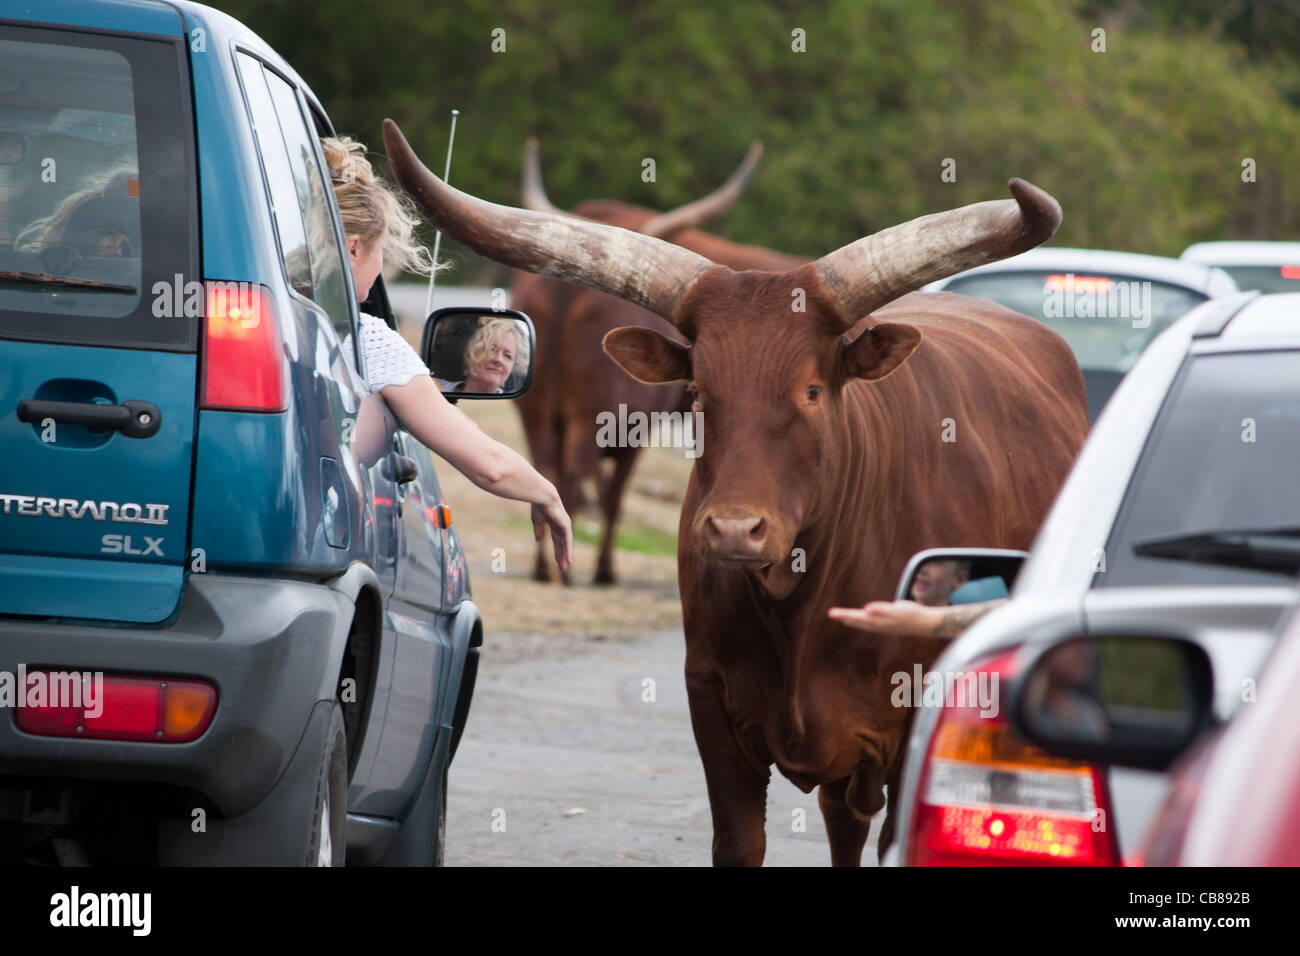 Buffalo zoo animals at a safari park being greeted by the general public, people in cars feeding and stroking the mammals. Stock Photo